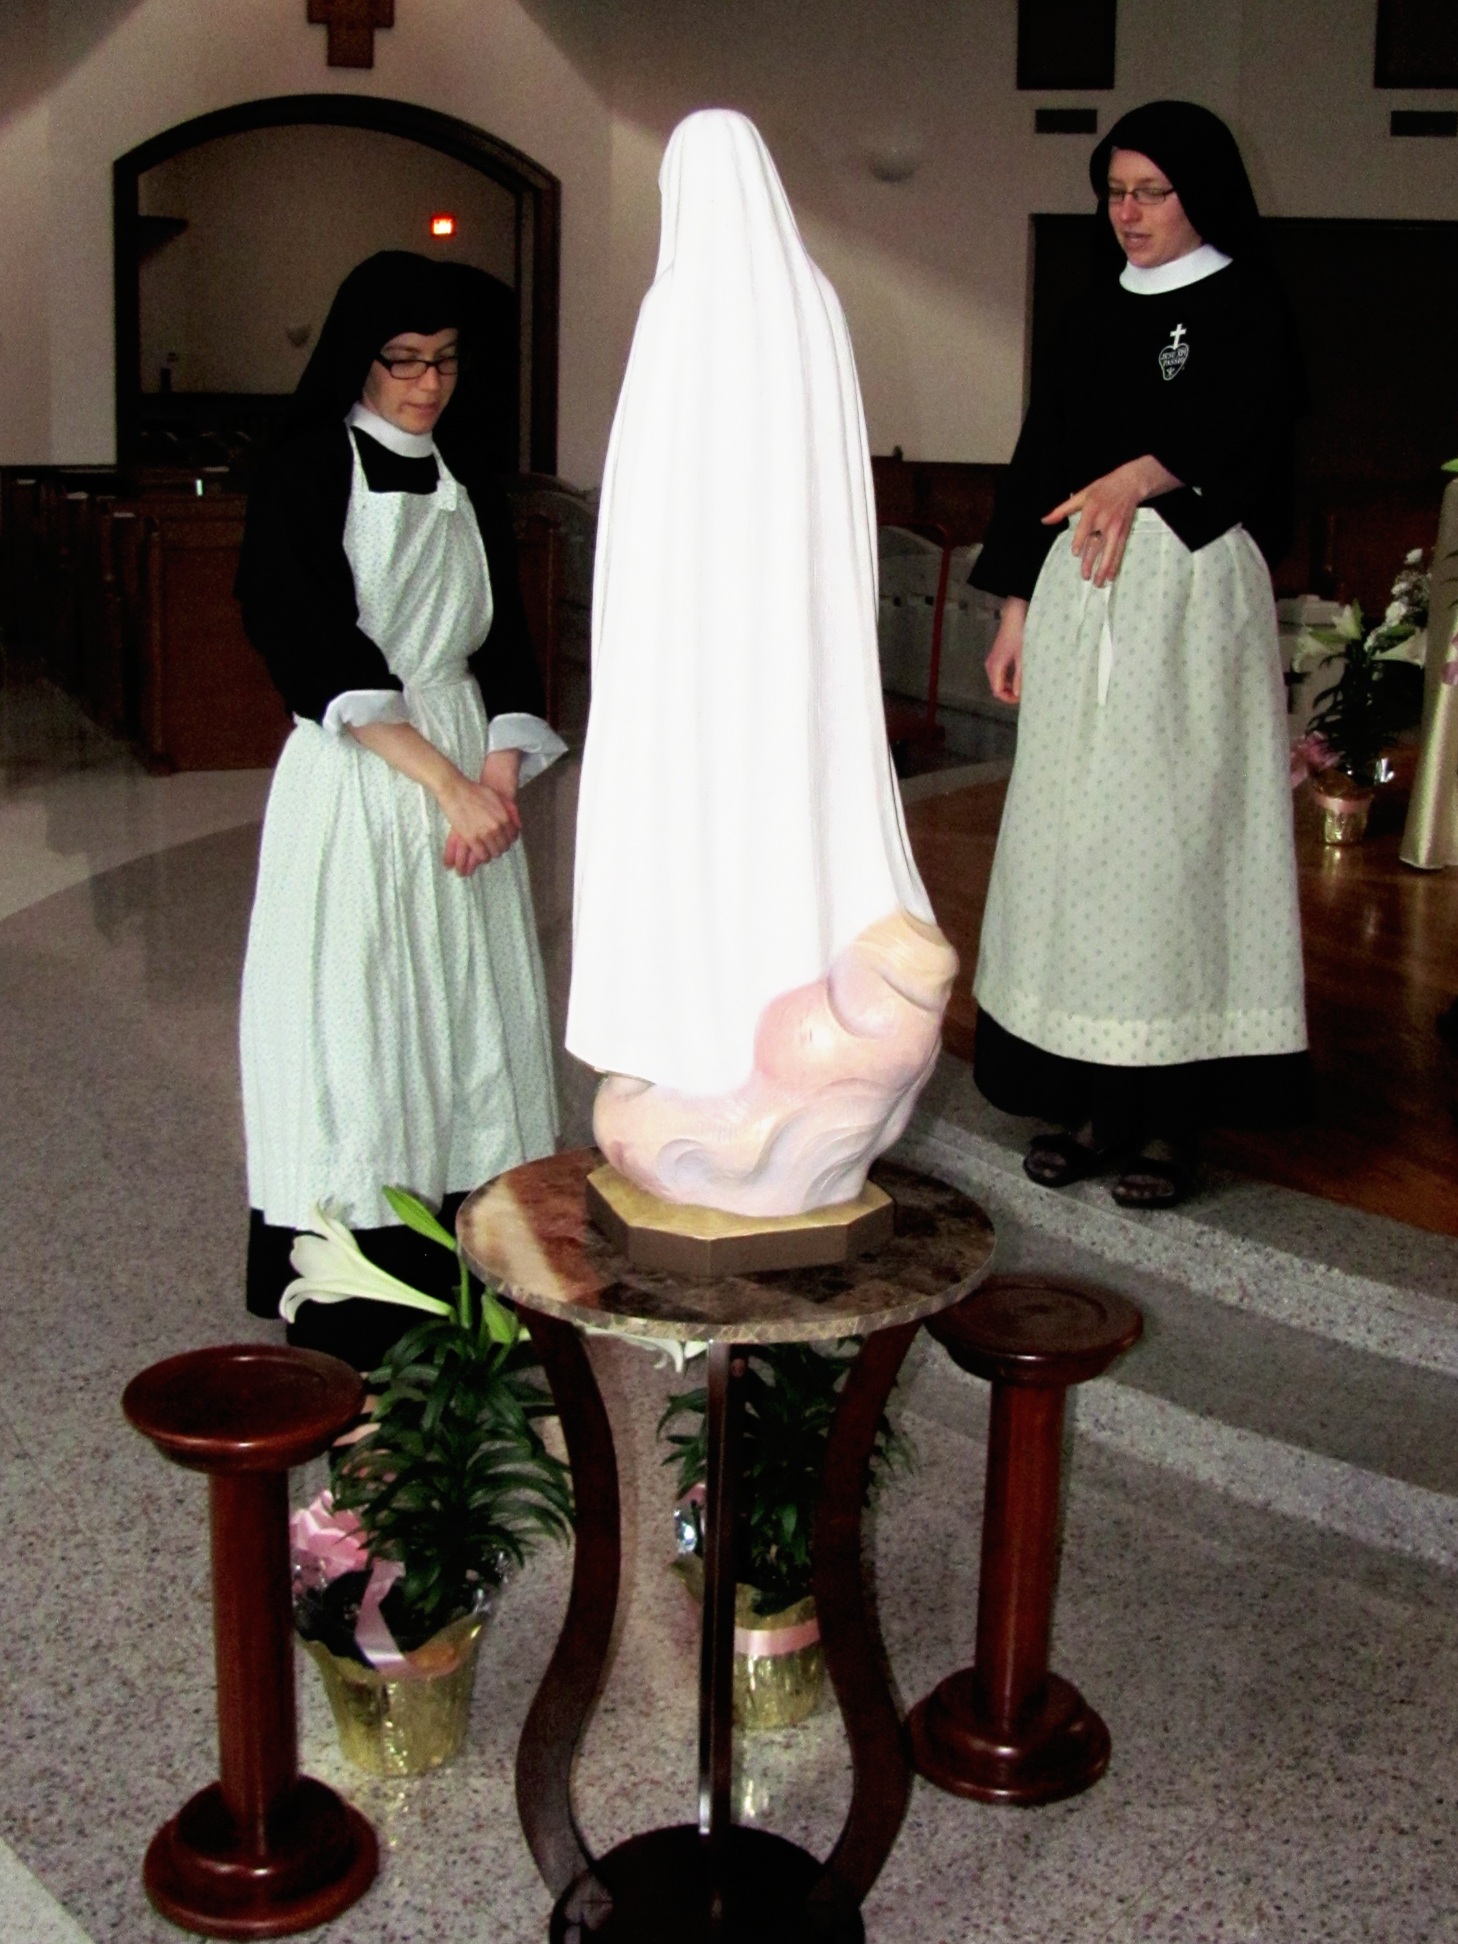  Are they contemplating the flower arrangement or Our Lady? 